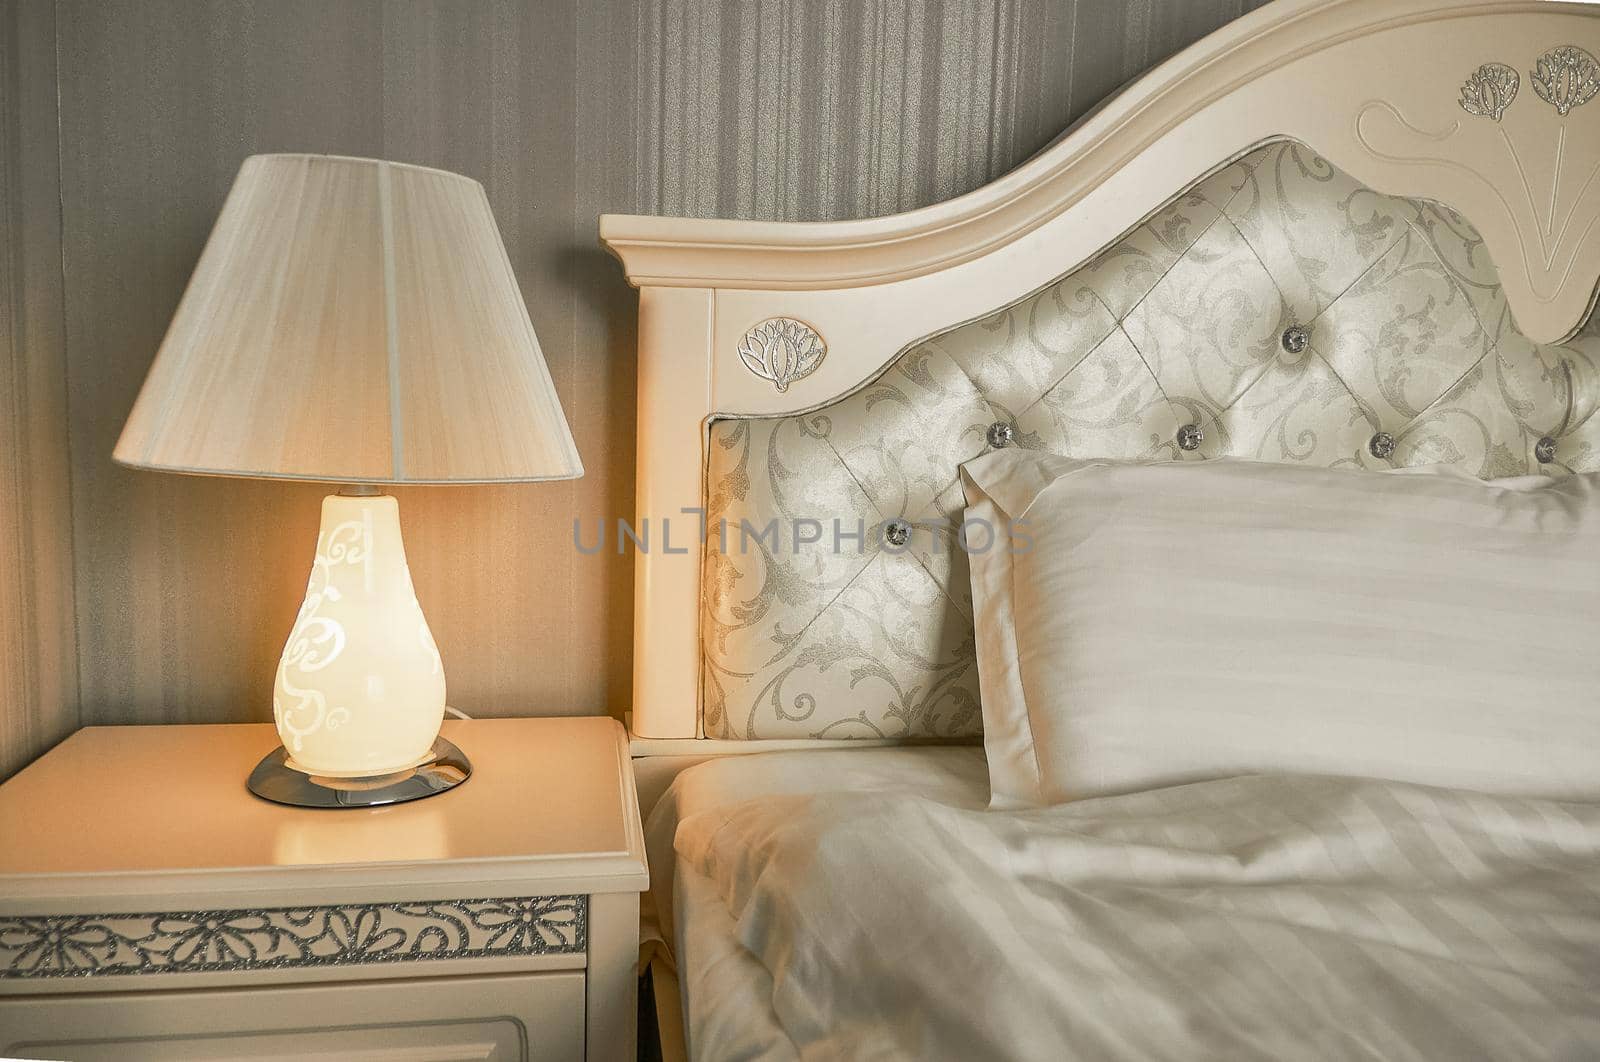 table lamp on a bedside table in a bedroom with gray walls near the bed is lit with yellow light